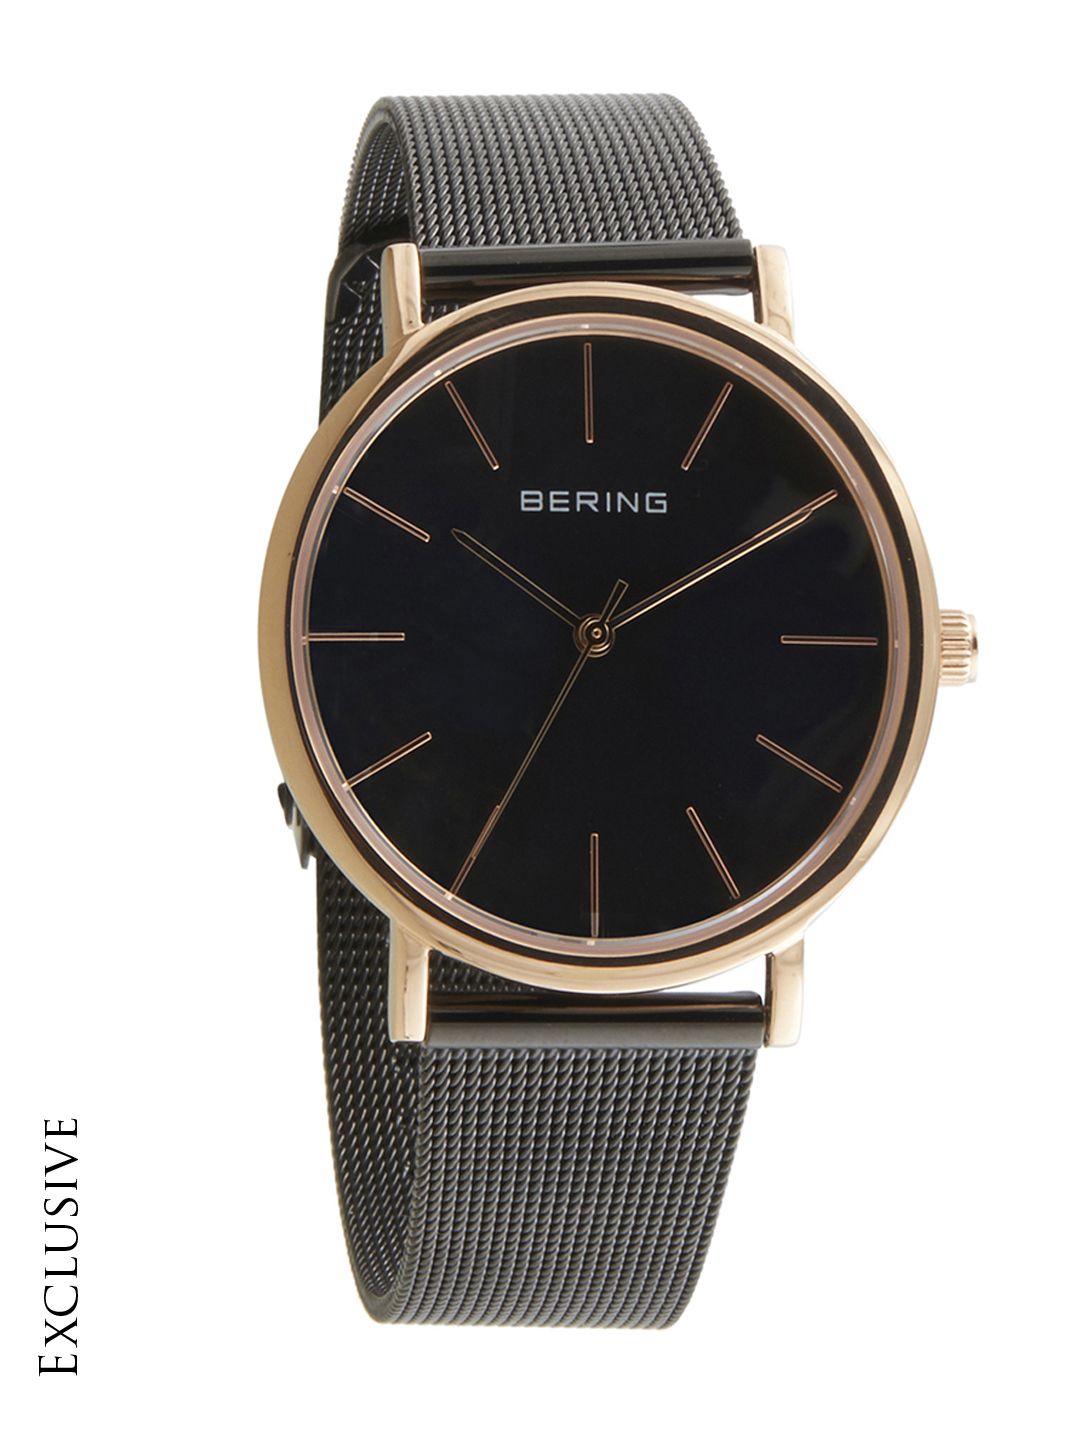 BERING Unisex Black Classic Sapphire Crystal Analogue Watch 13436-166 Price in India